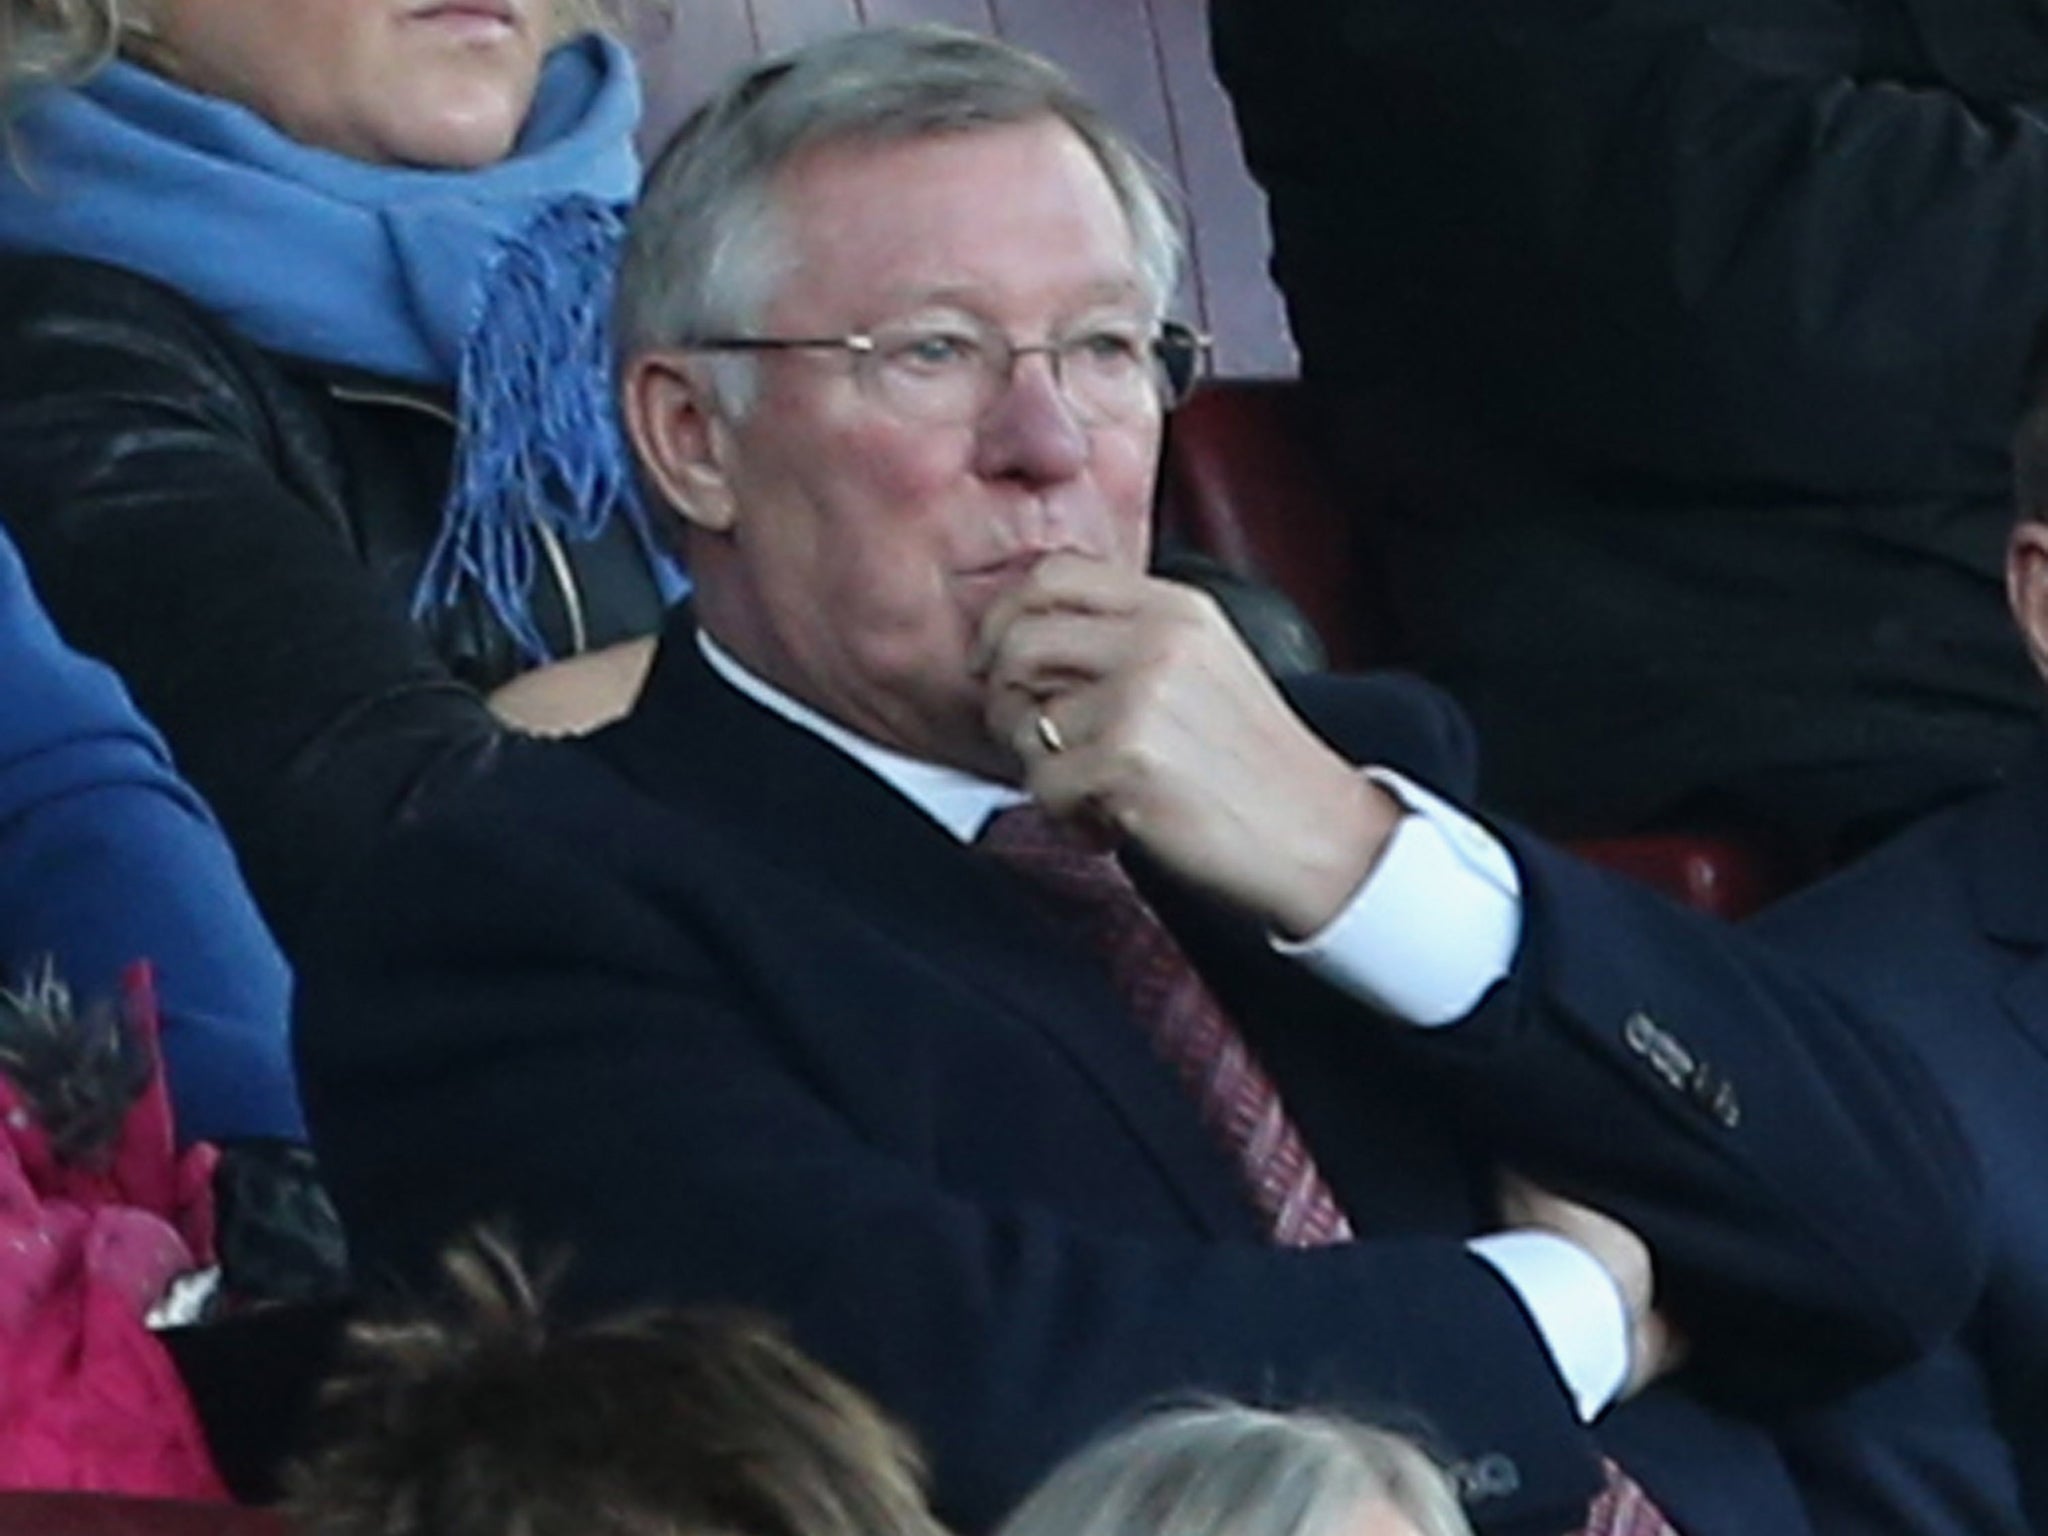 Sir Alex Ferguson looks on from the stands during Manchester United's 3-2 victory over Stoke